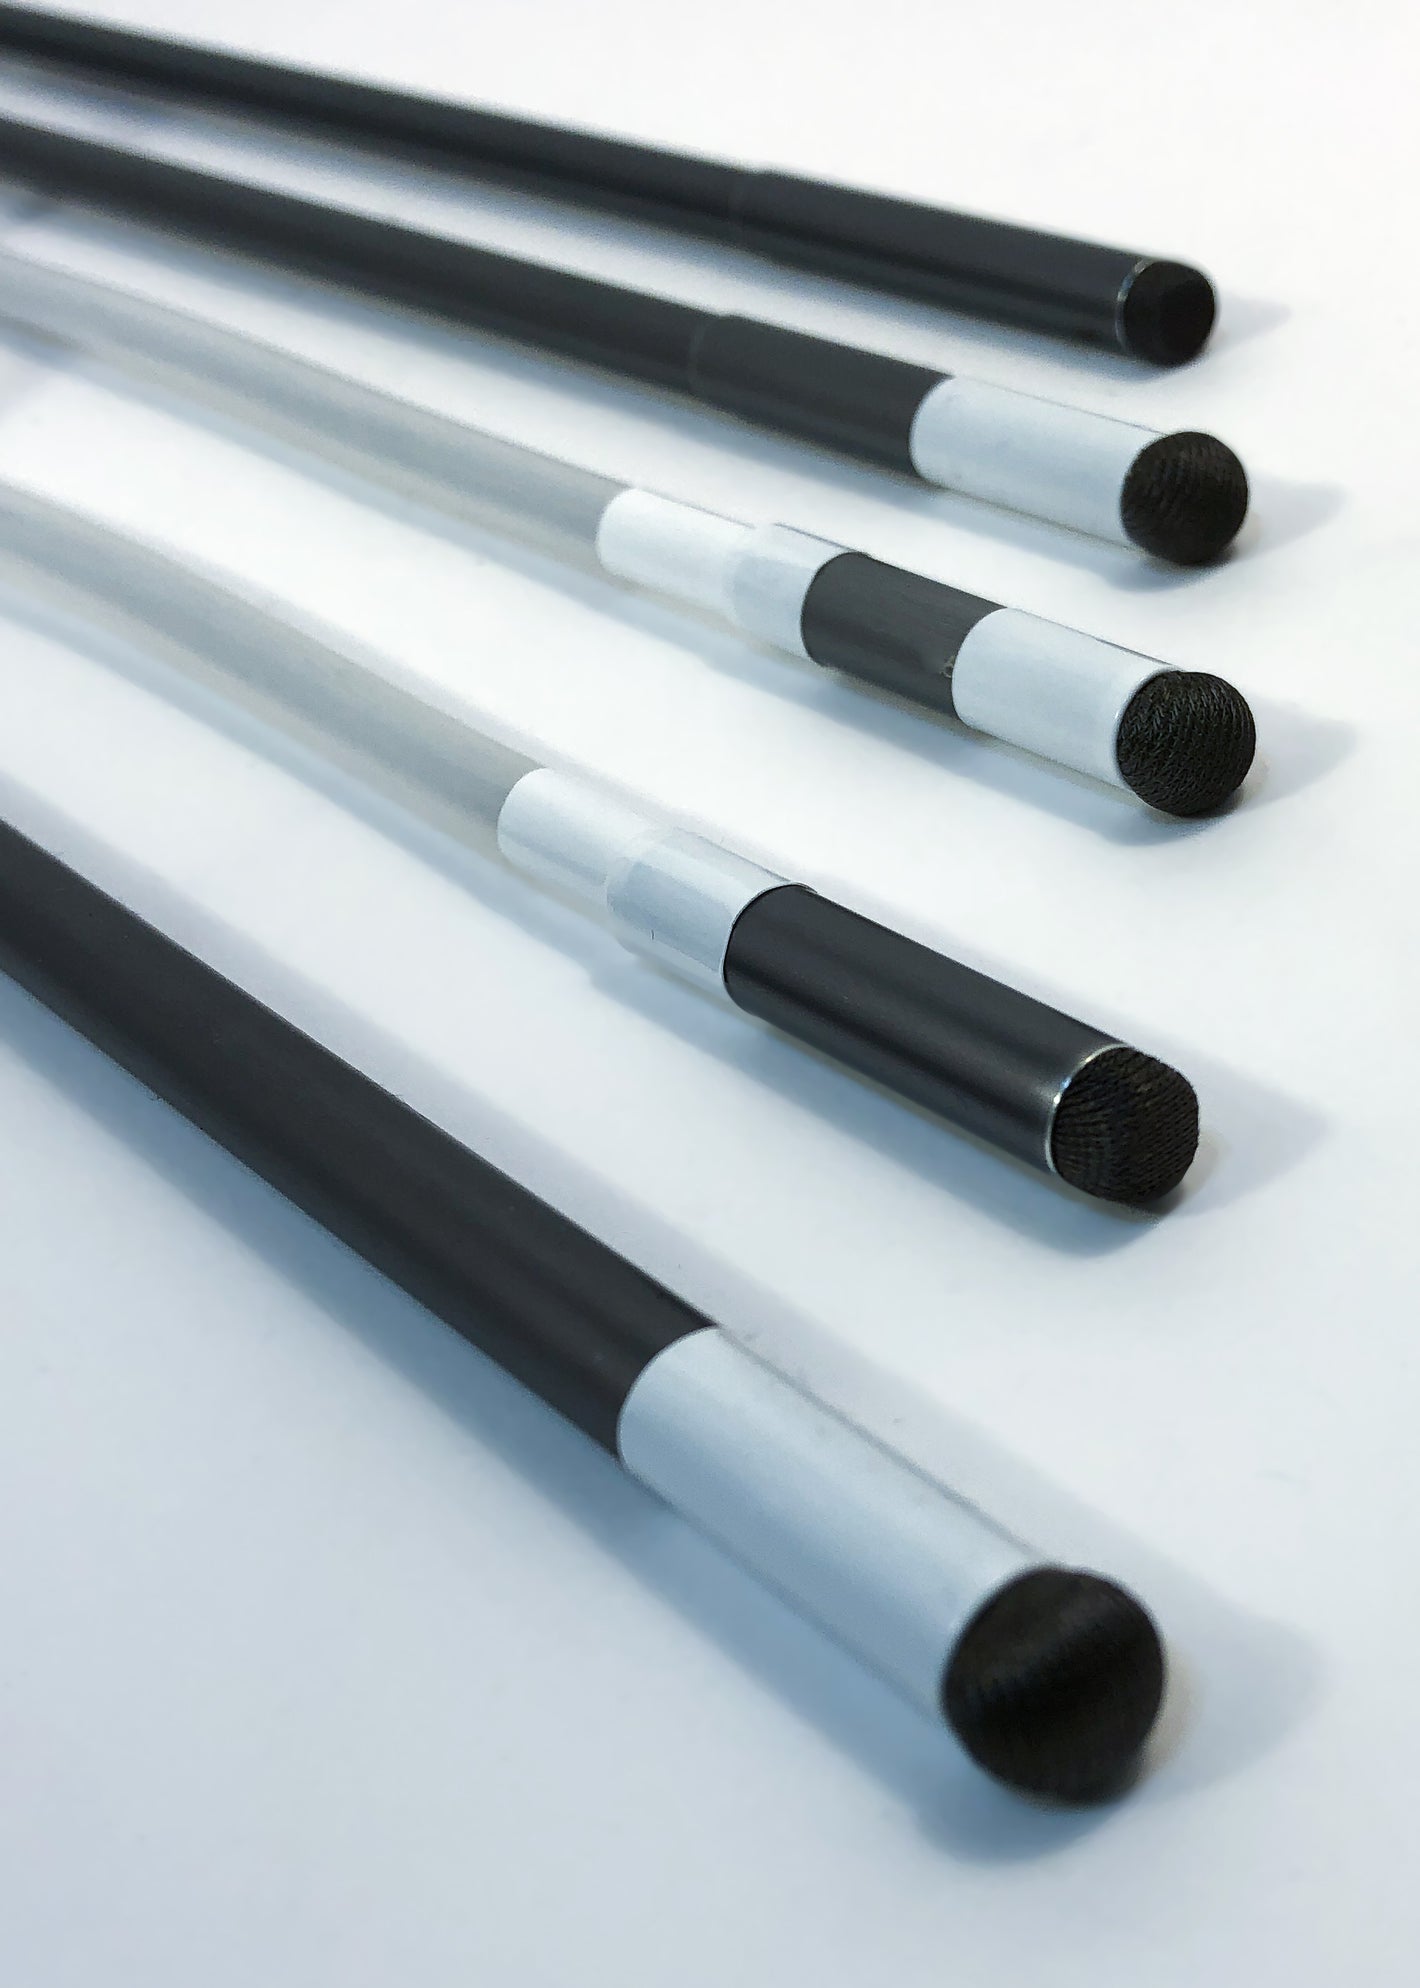 A mix of Basic tipped and SALT tipped styluses